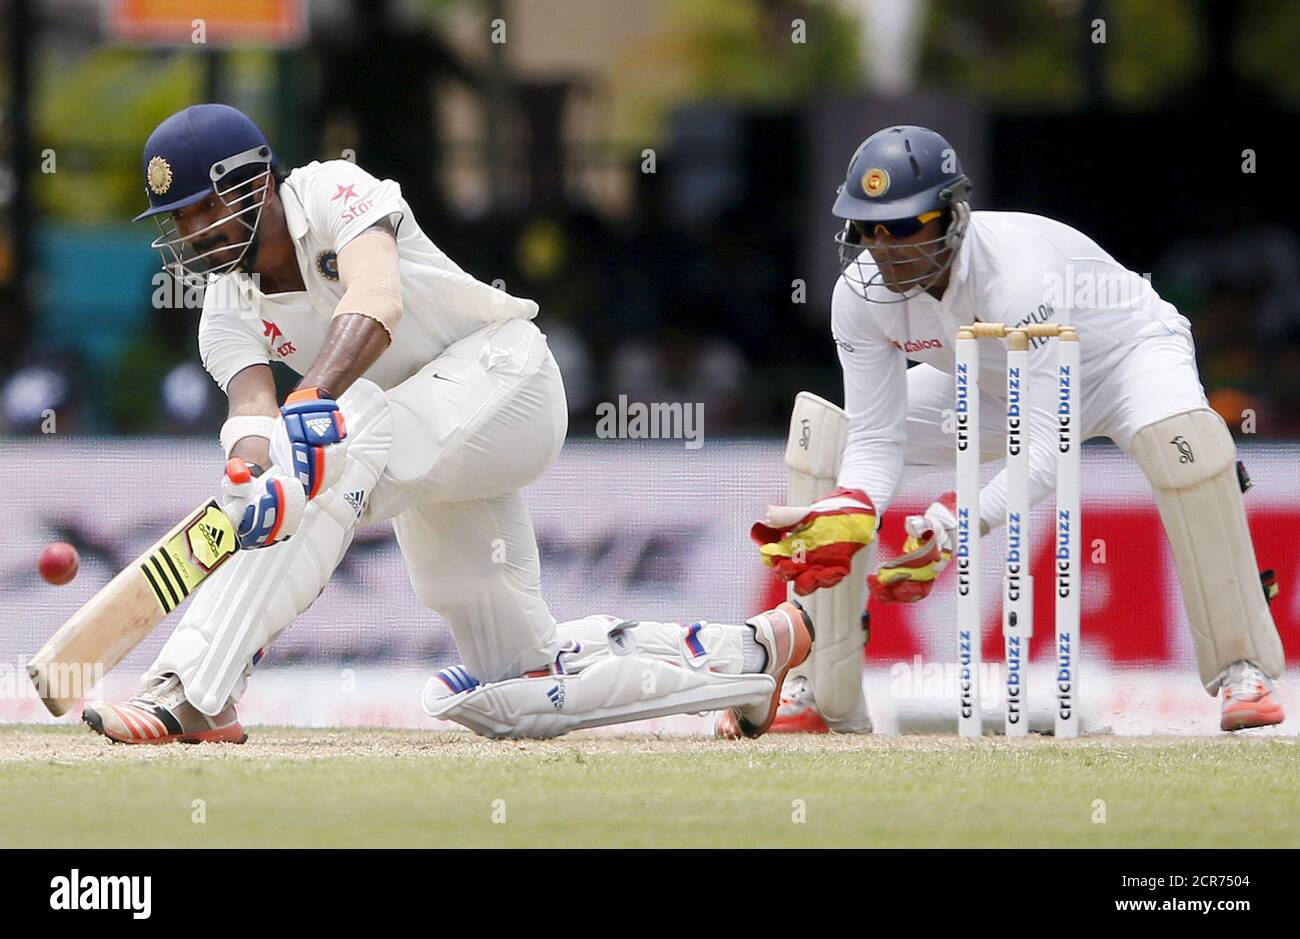 India's Lokesh Rahul (L) plays a shot next to Sri Lanka's wicketkeeper Dinesh Chandimal during the first day of their second test cricket match in Colombo, August 20, 2015. REUTERS/Dinuka Liyanawatte Stock Photo